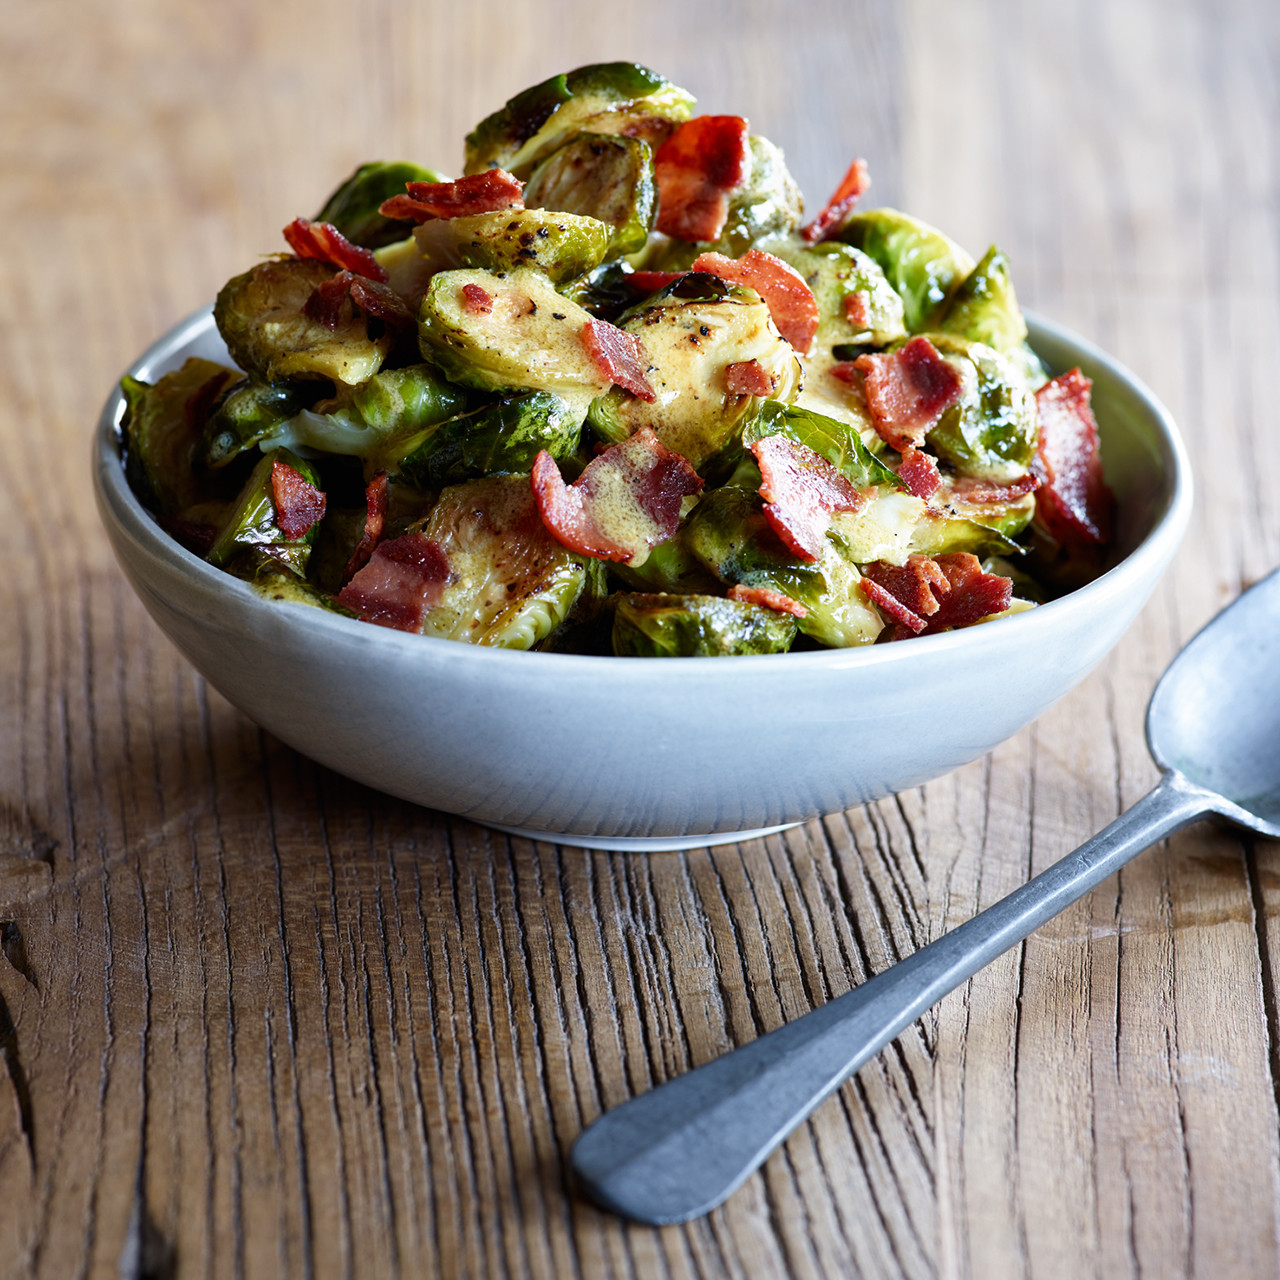 Sprouts Thanksgiving Turkey
 Roasted Brussels Sprouts With Turkey Bacon Vinaigrette